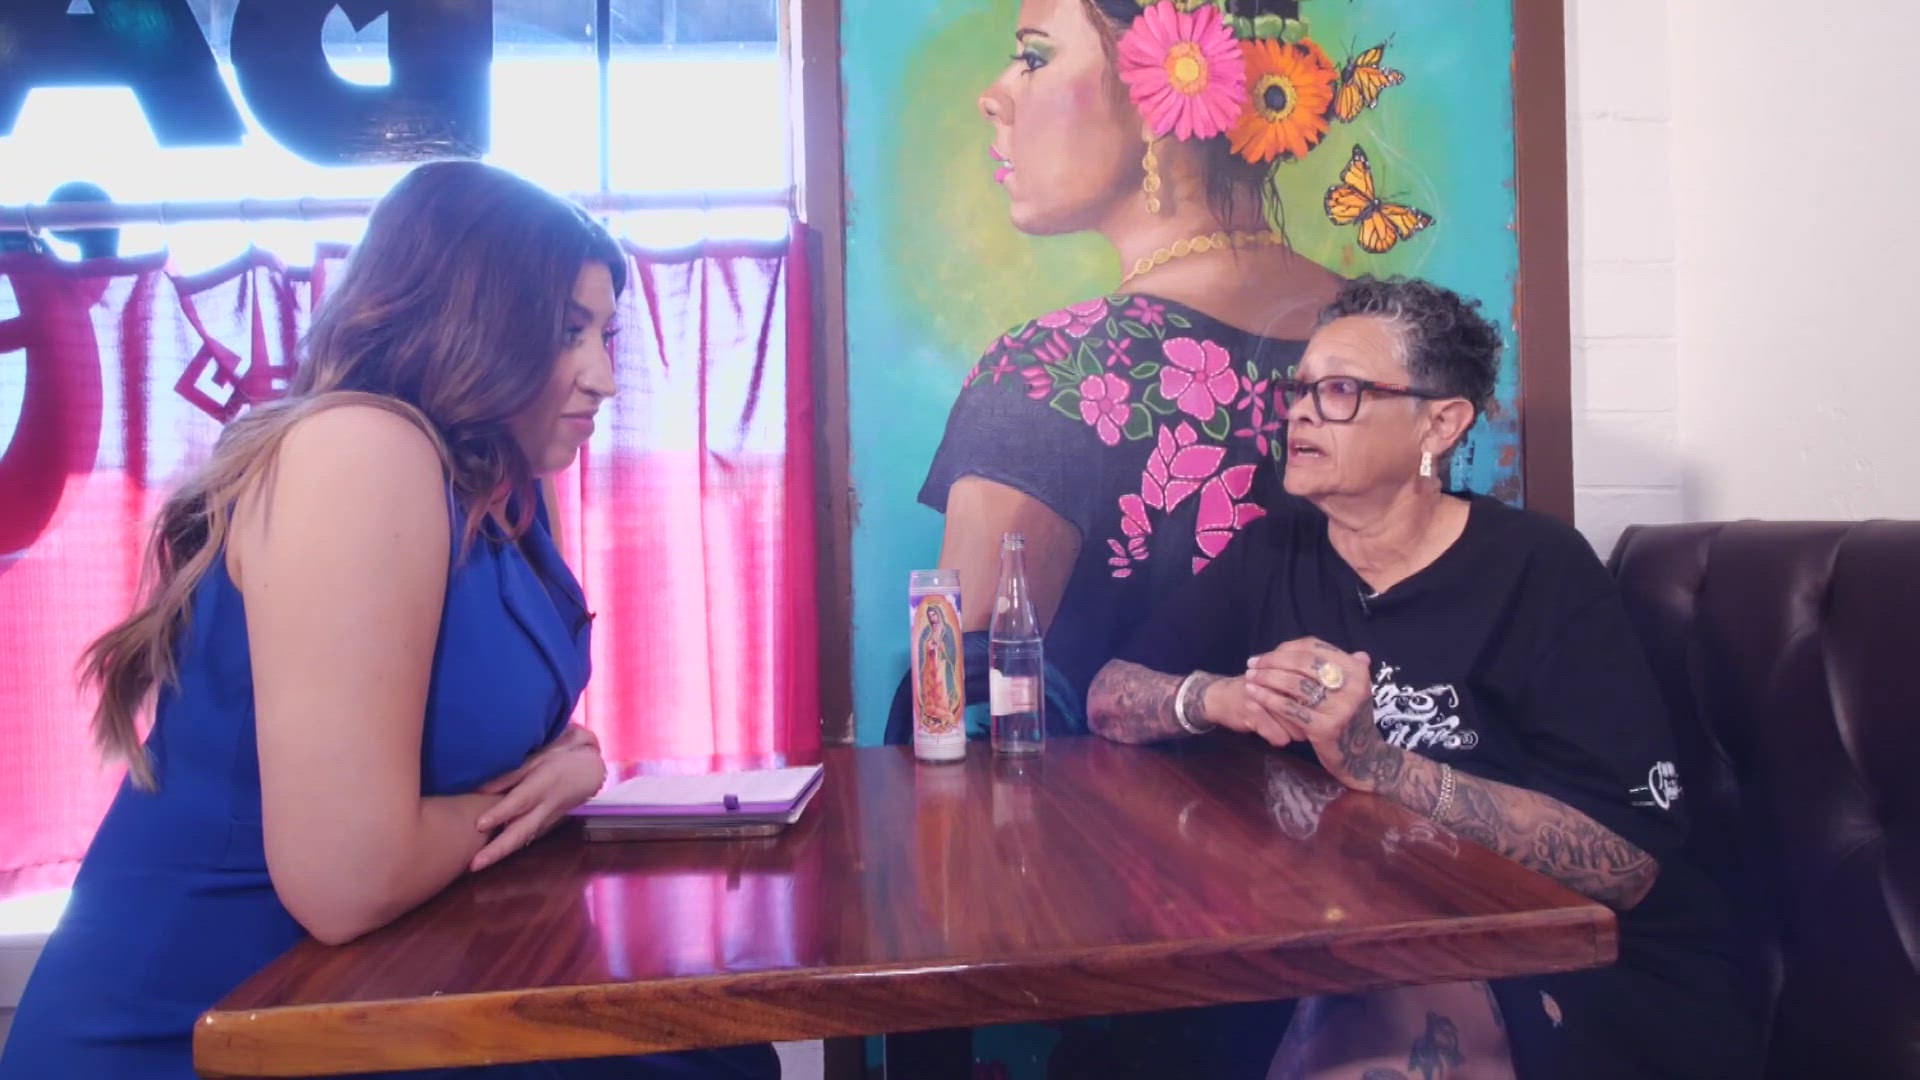 The Barrio Cafe restaurant in Phoenix is closing its doors for good. Hear from the owner on what is next for her.